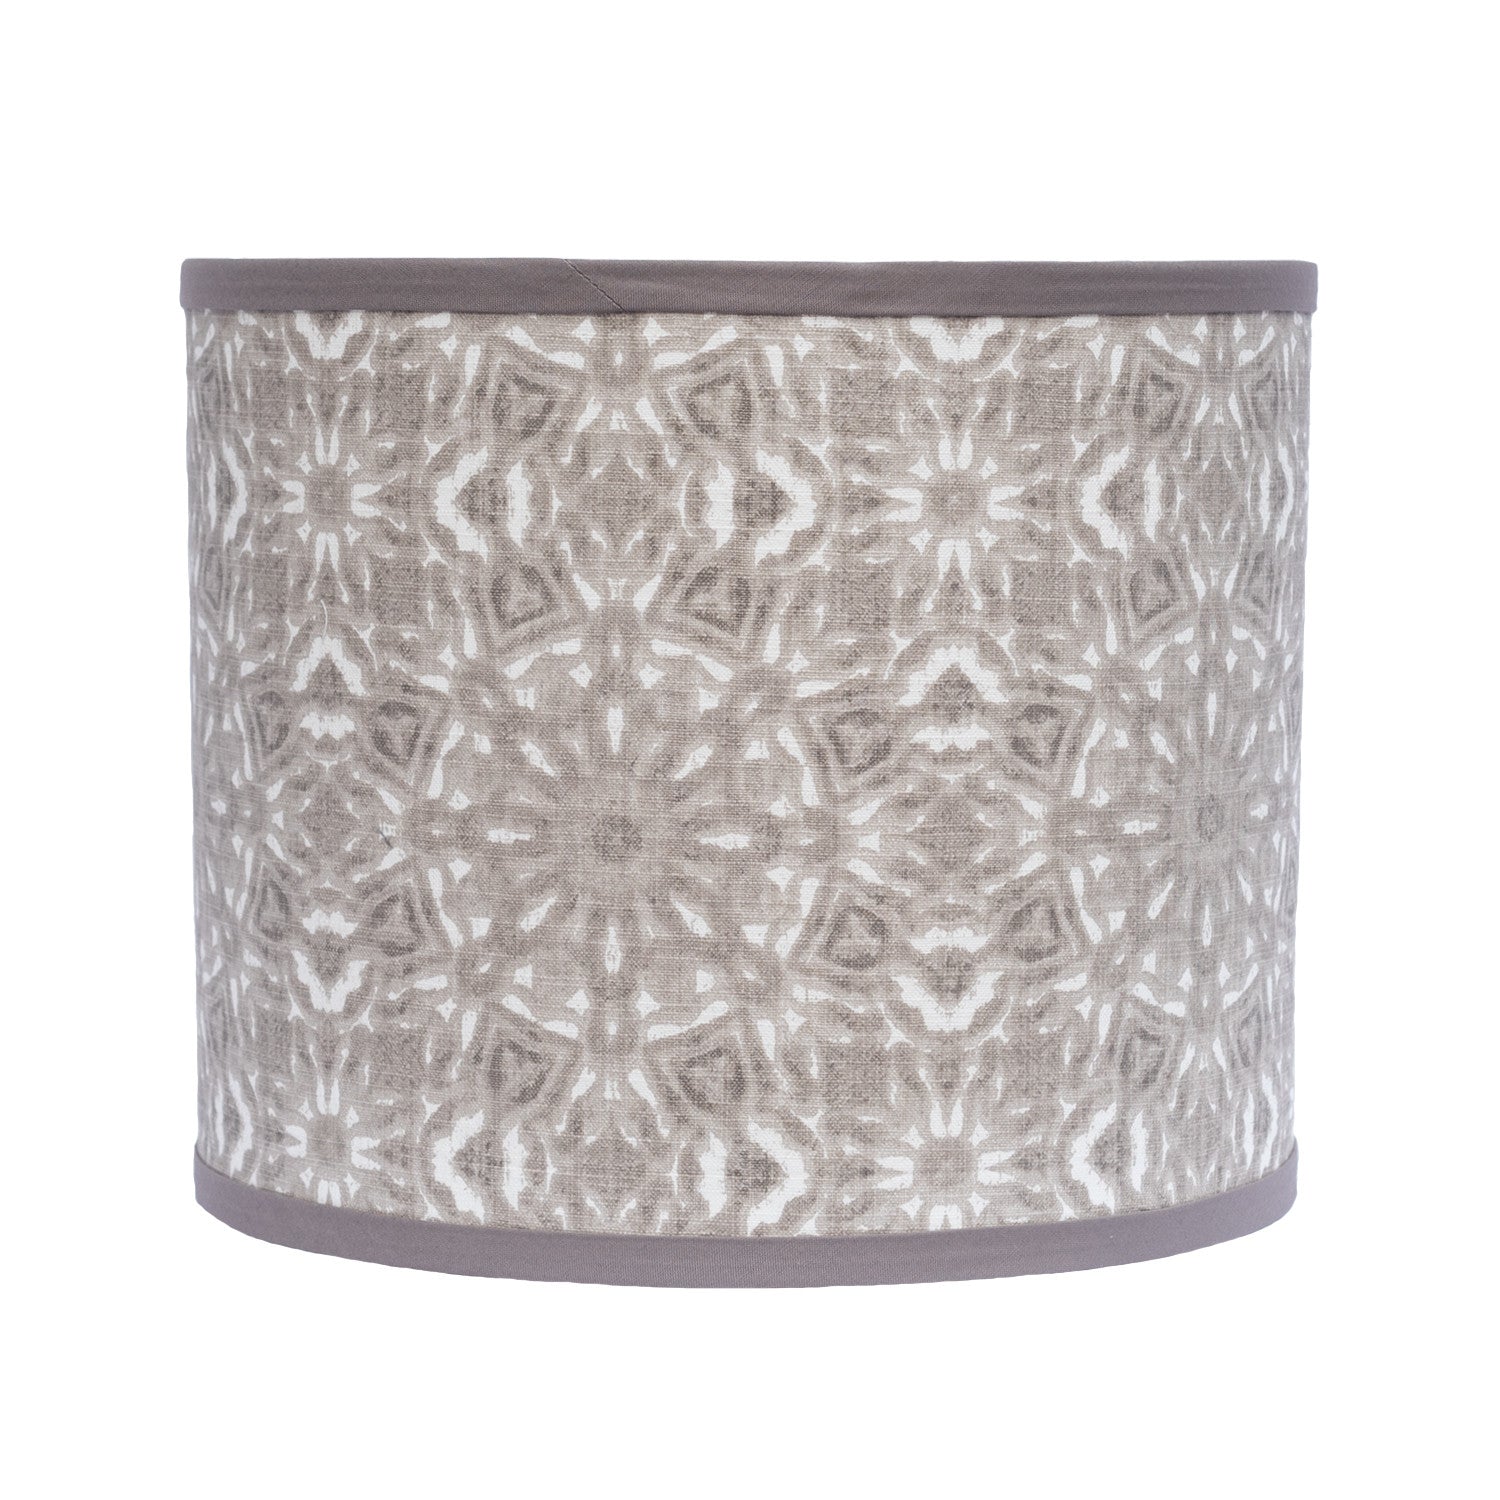 27" White Table Lamp With Gray Taupe Batik Print Drum Shade - Tuesday Morning-Table Lamps